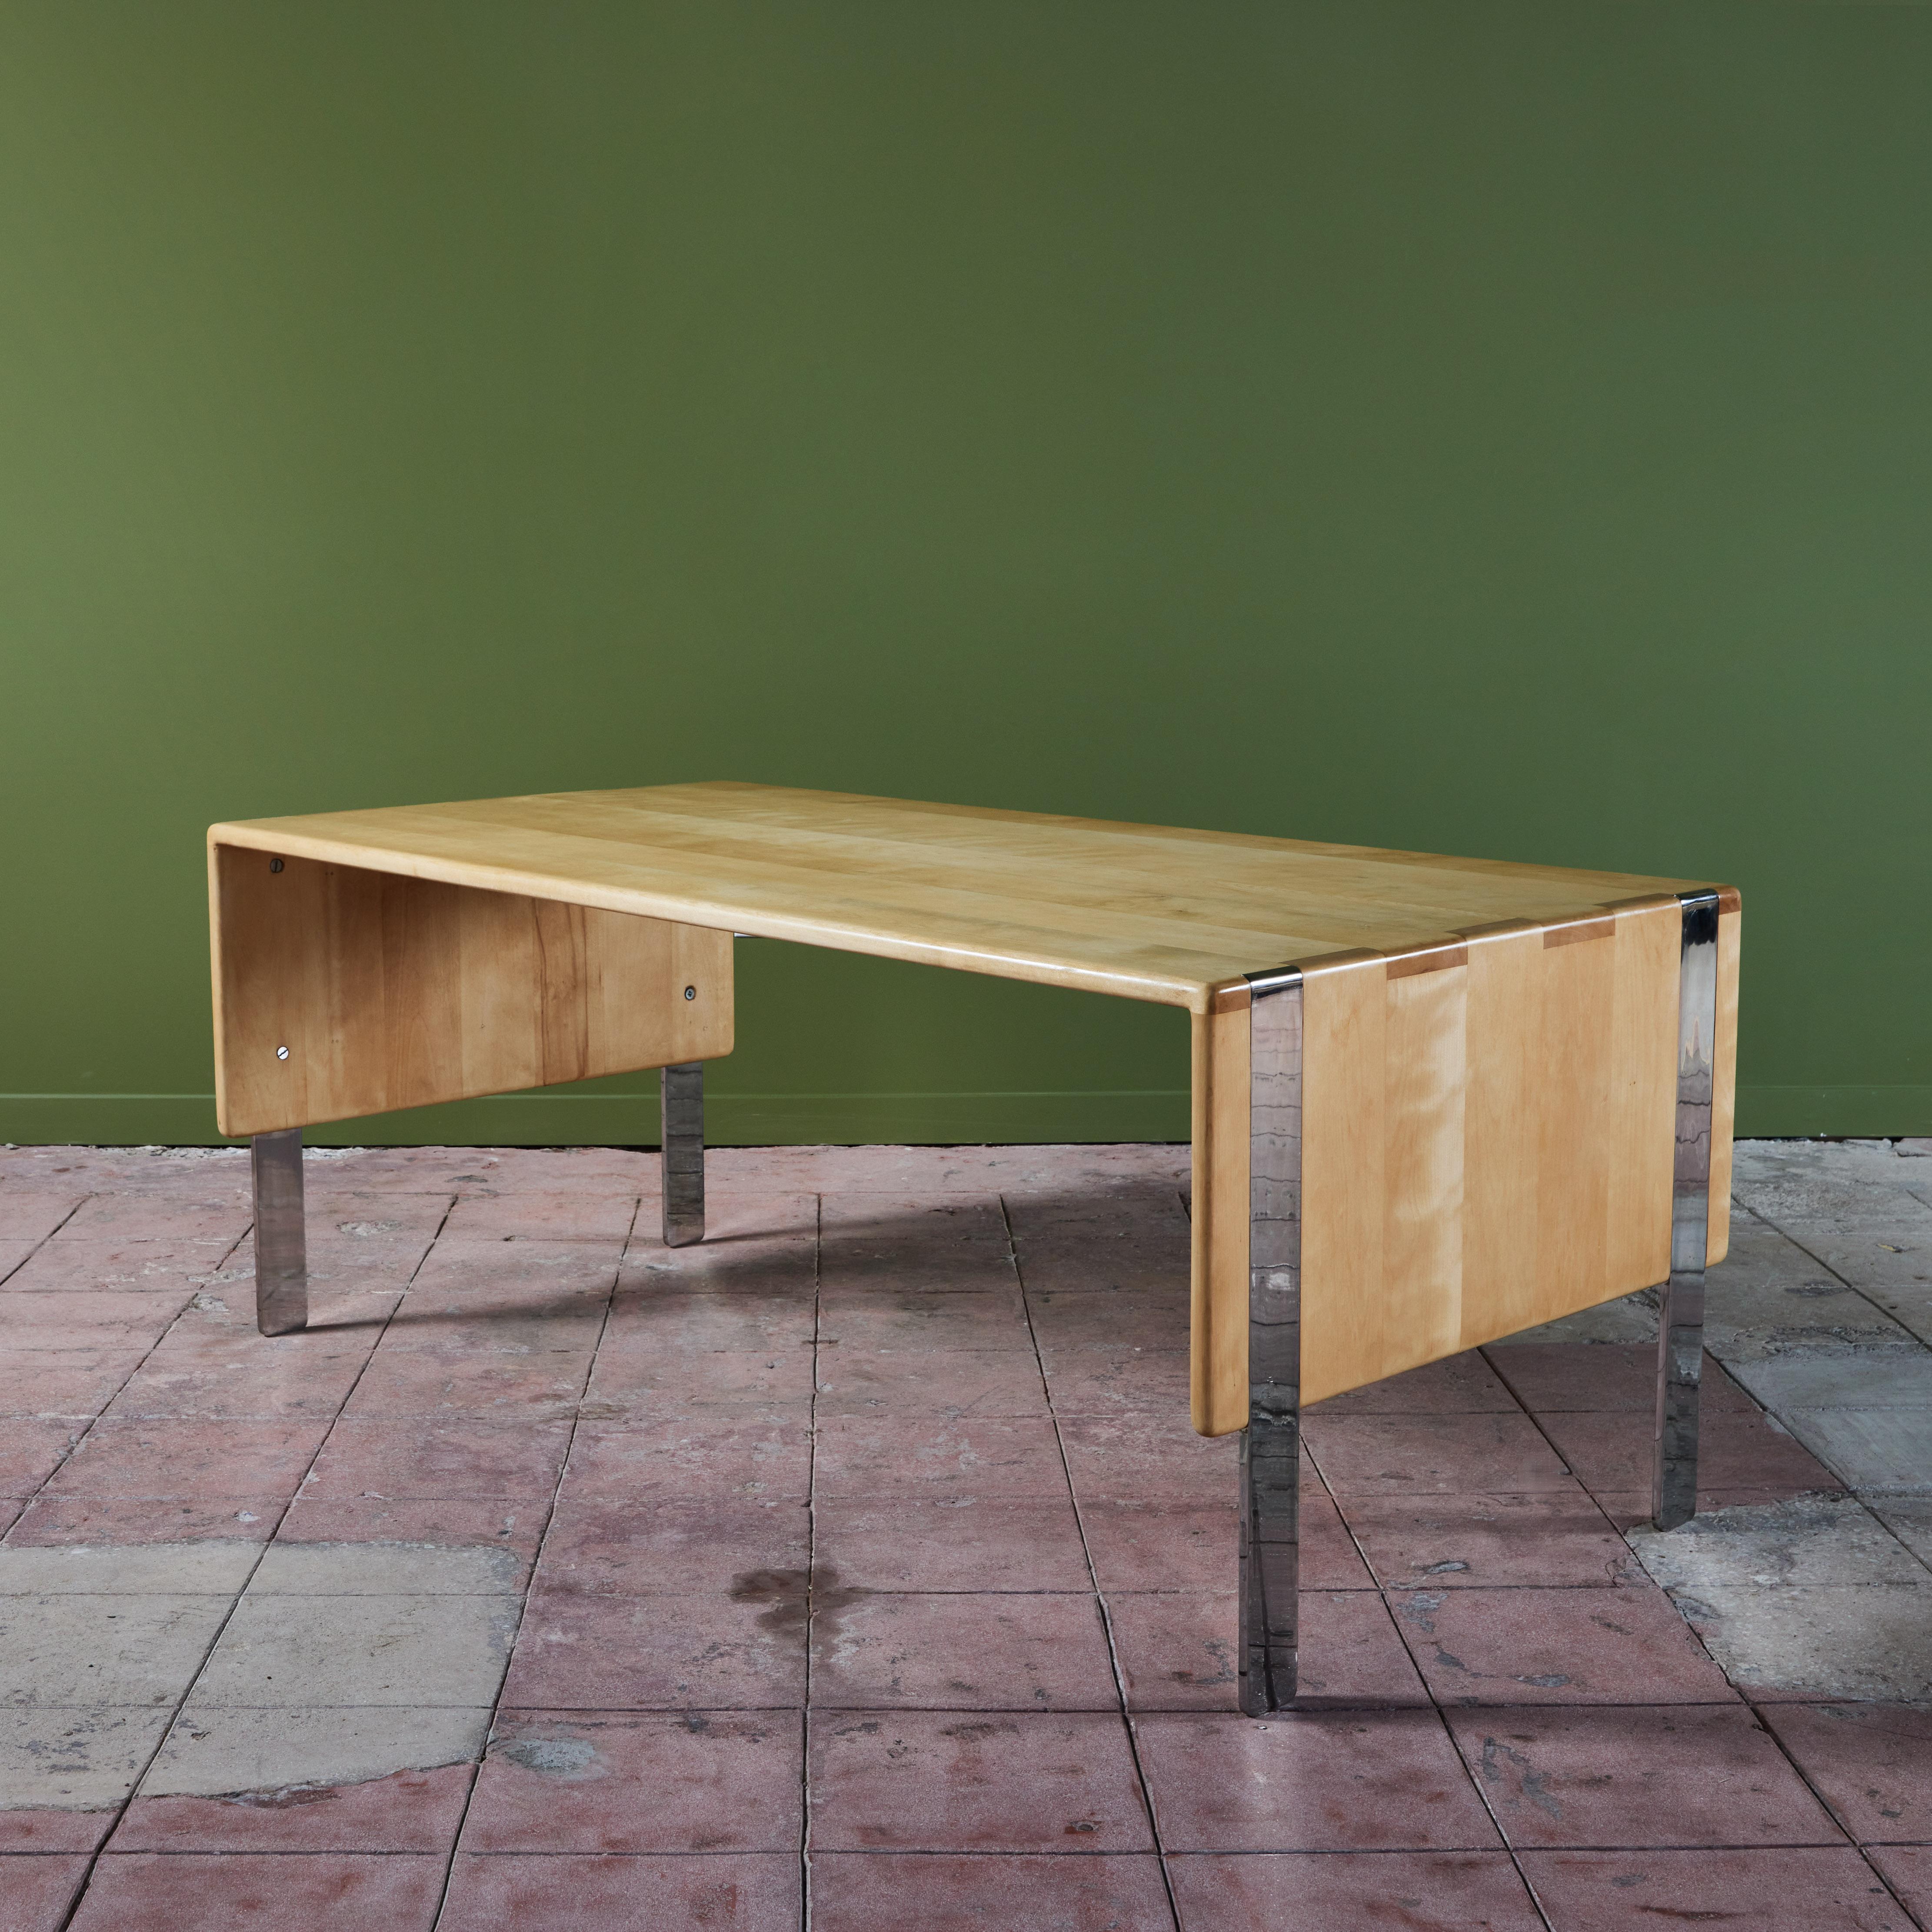 Desk or table by Gerald McCabe for Eon Furniture. The maple table, features soft rounded sides with finger joinery detailing at the edges. The table is supported by four inlayed rectangular chrome legs. 

Dimensions
72